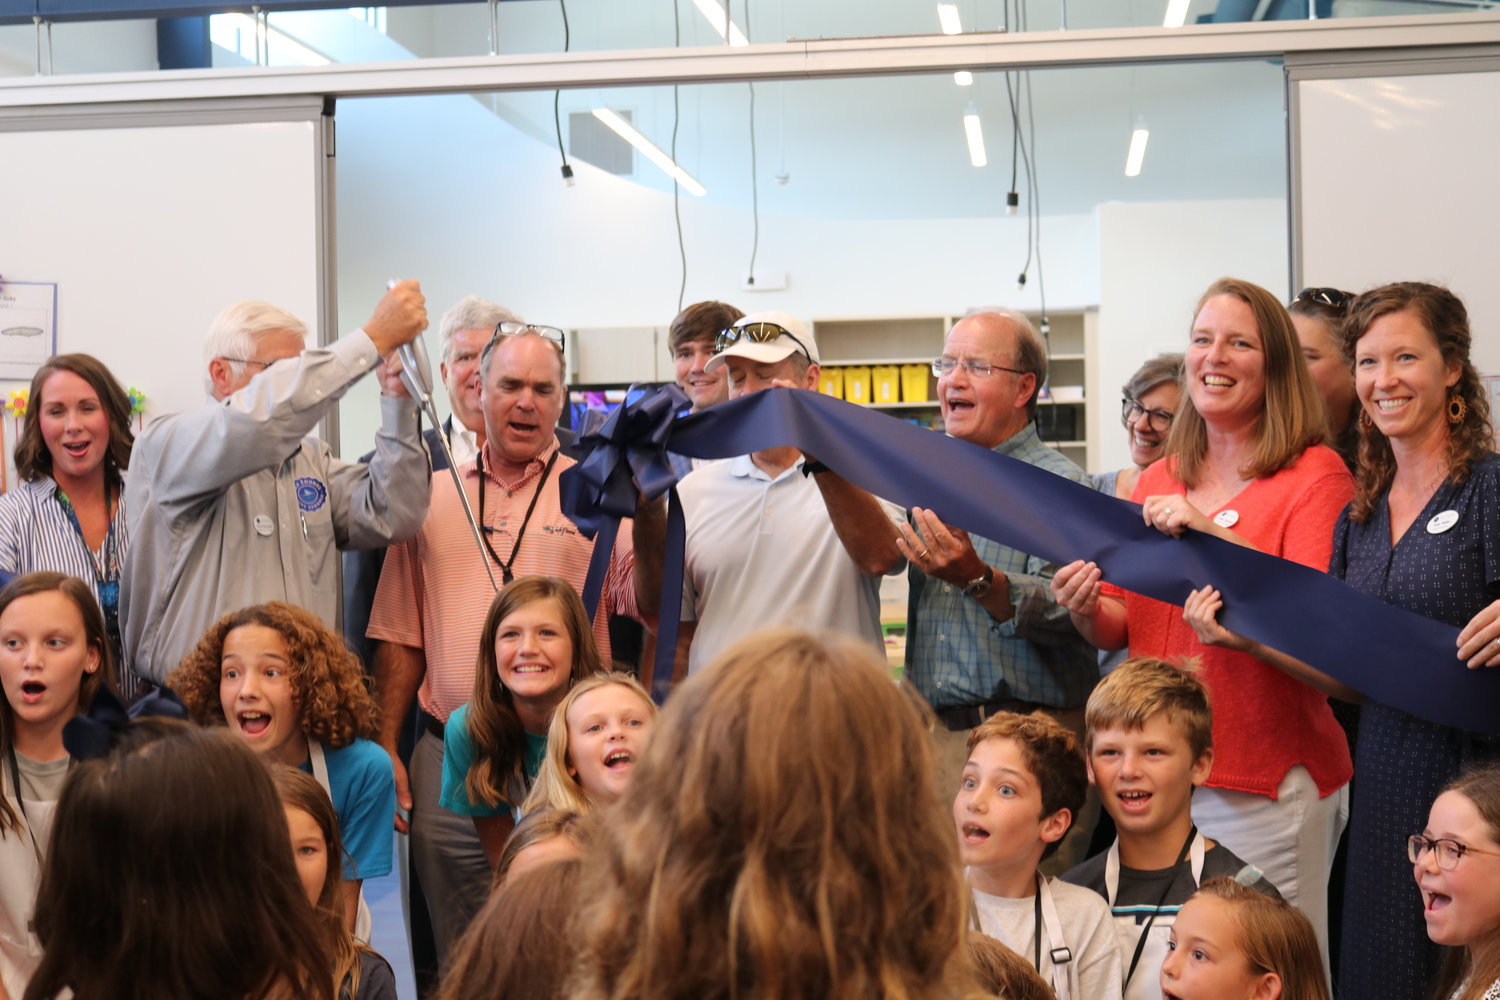 Gulf Shores City School board and Gulf Shores City Council cut the ribbon on the STEAM Collaborative Learning Center at Gulf Shores Elementary School.